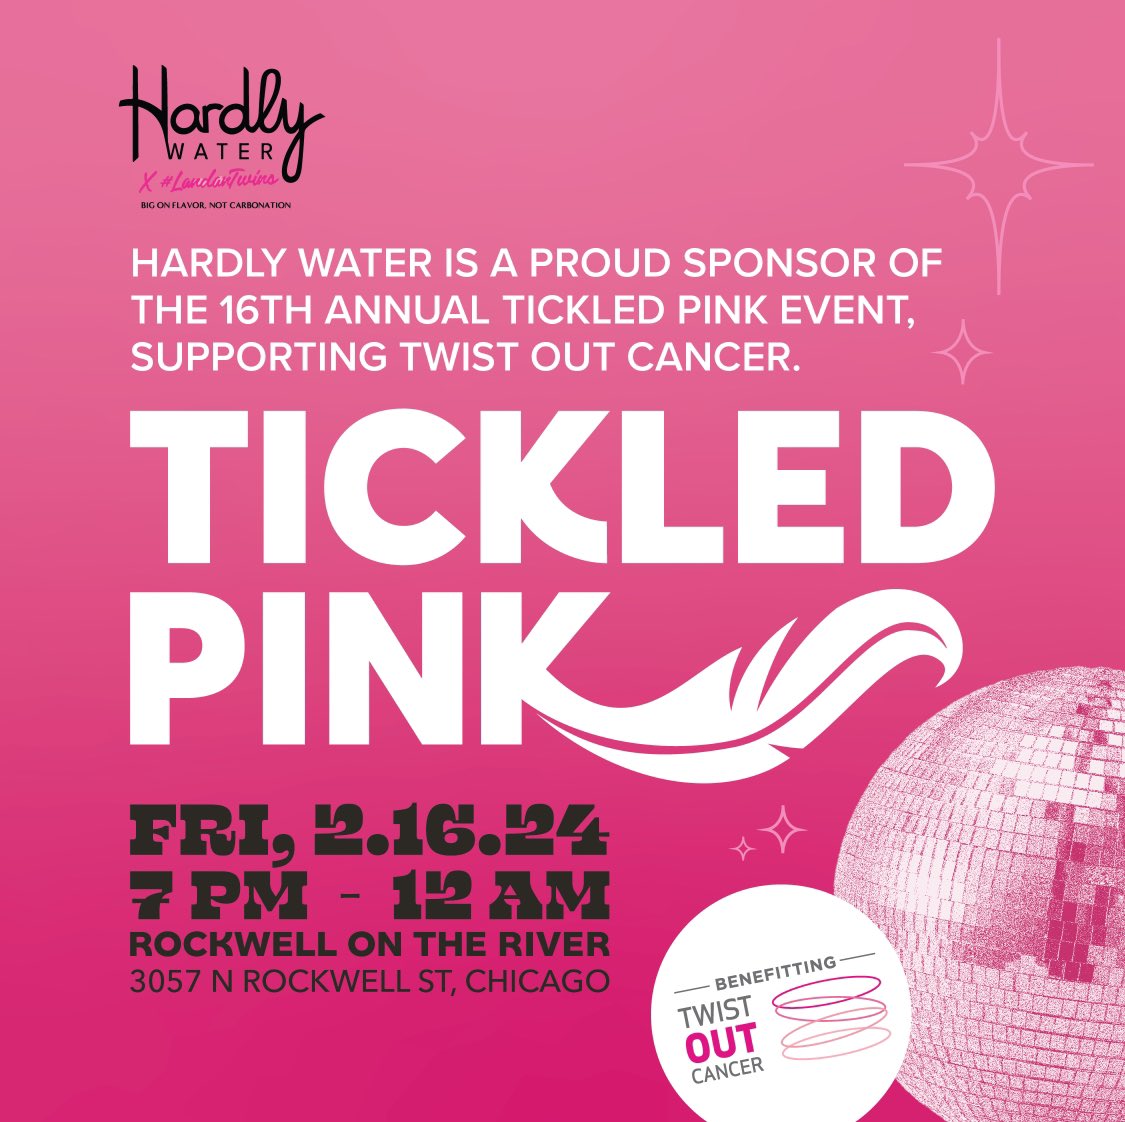 The #LandanTwins x @hardlywater Is A Proud Sponsor Of Our Good Friends @jodiafyfe x @hannah_fyfe x @paramountevents x @tpgchi x 16th Annual @tickledpinkchicago Supporting @twistoutcancer This Fri, Feb 16 - 7pm @rockwellontheriver Get UR TIX Today @chicago x @illinoisrestaurants!